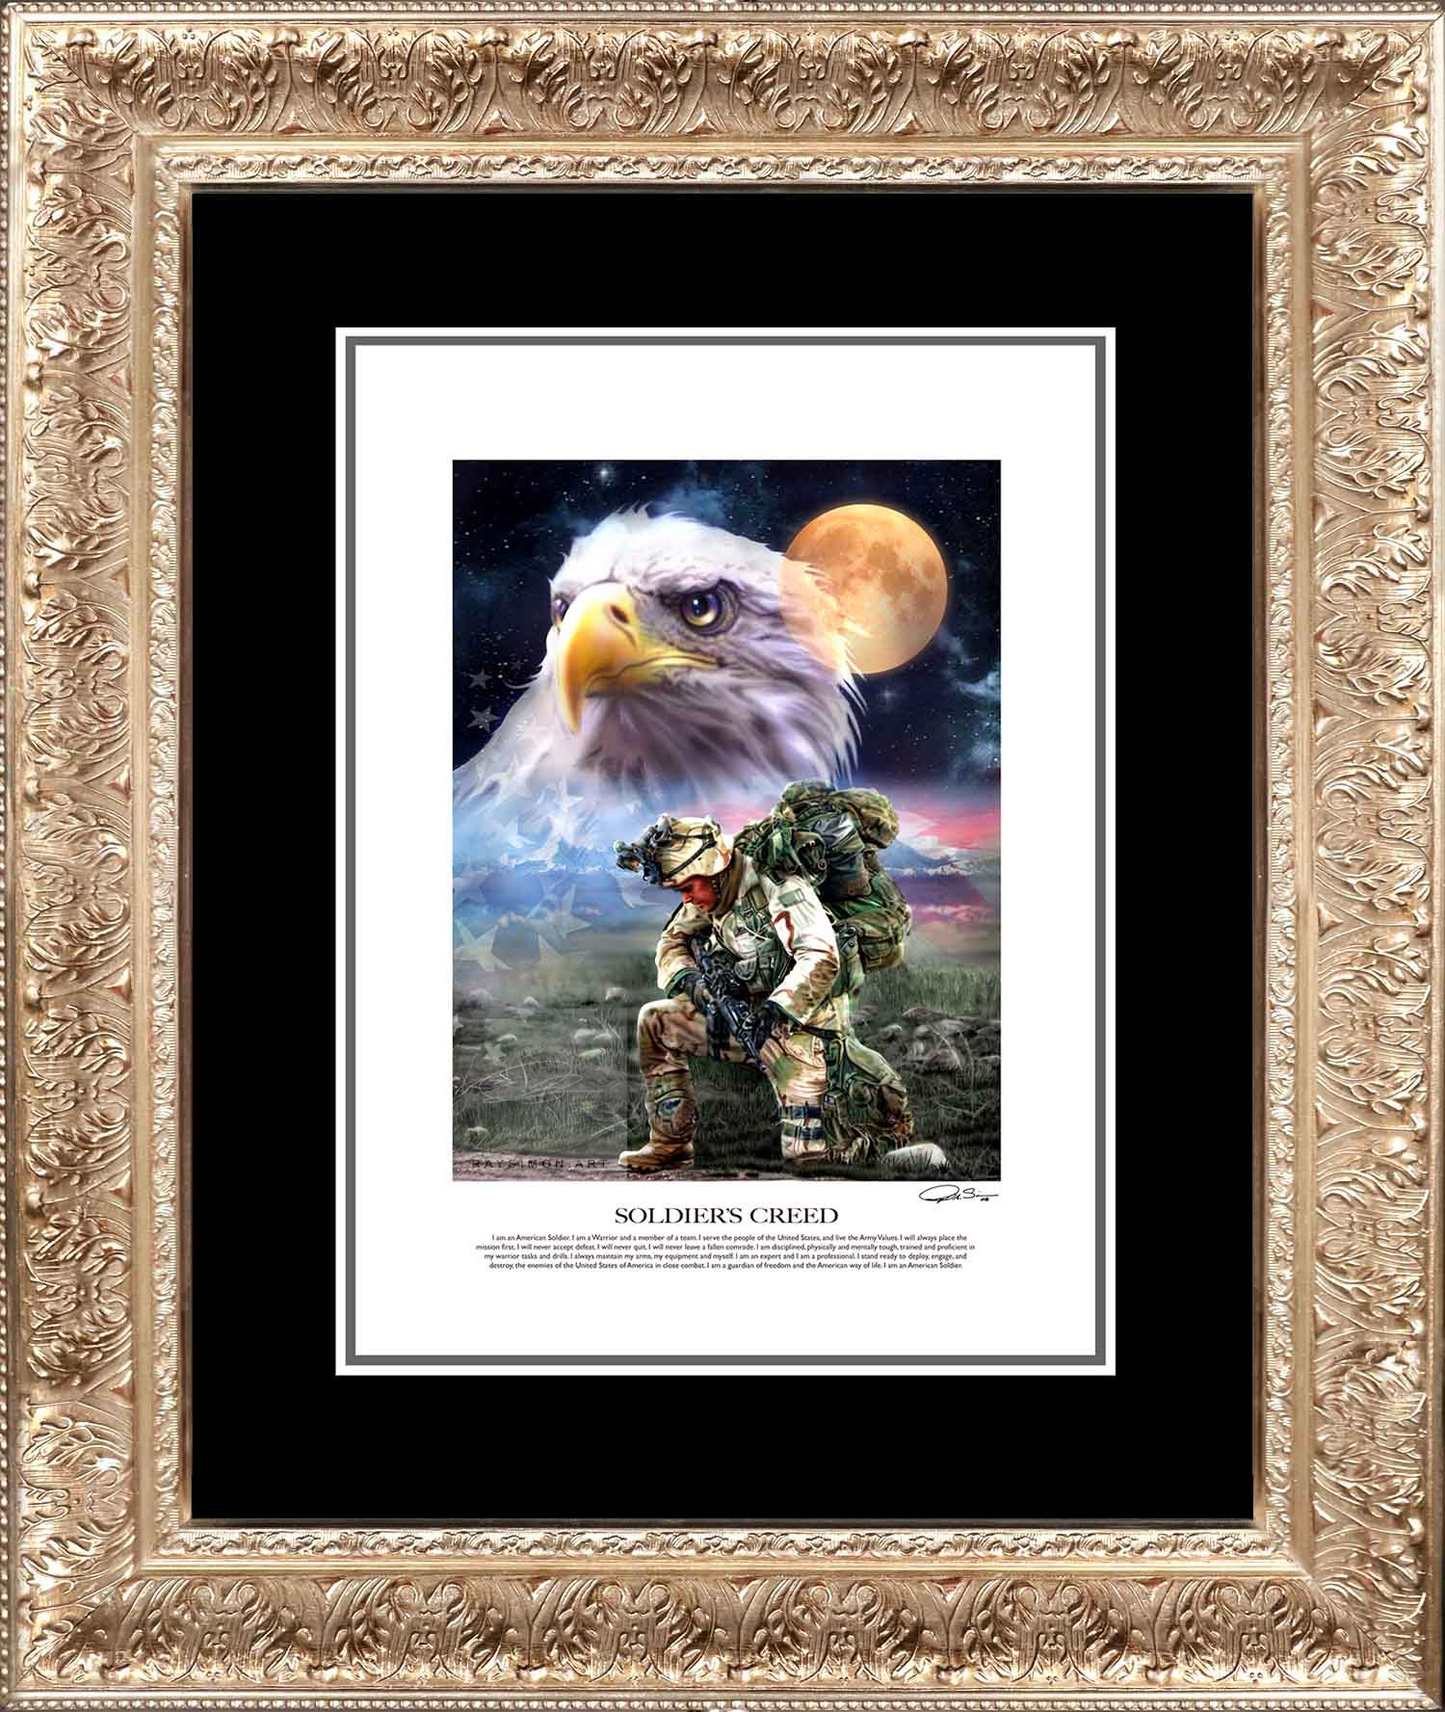 Army Artwork - 'Soldier's Creed'